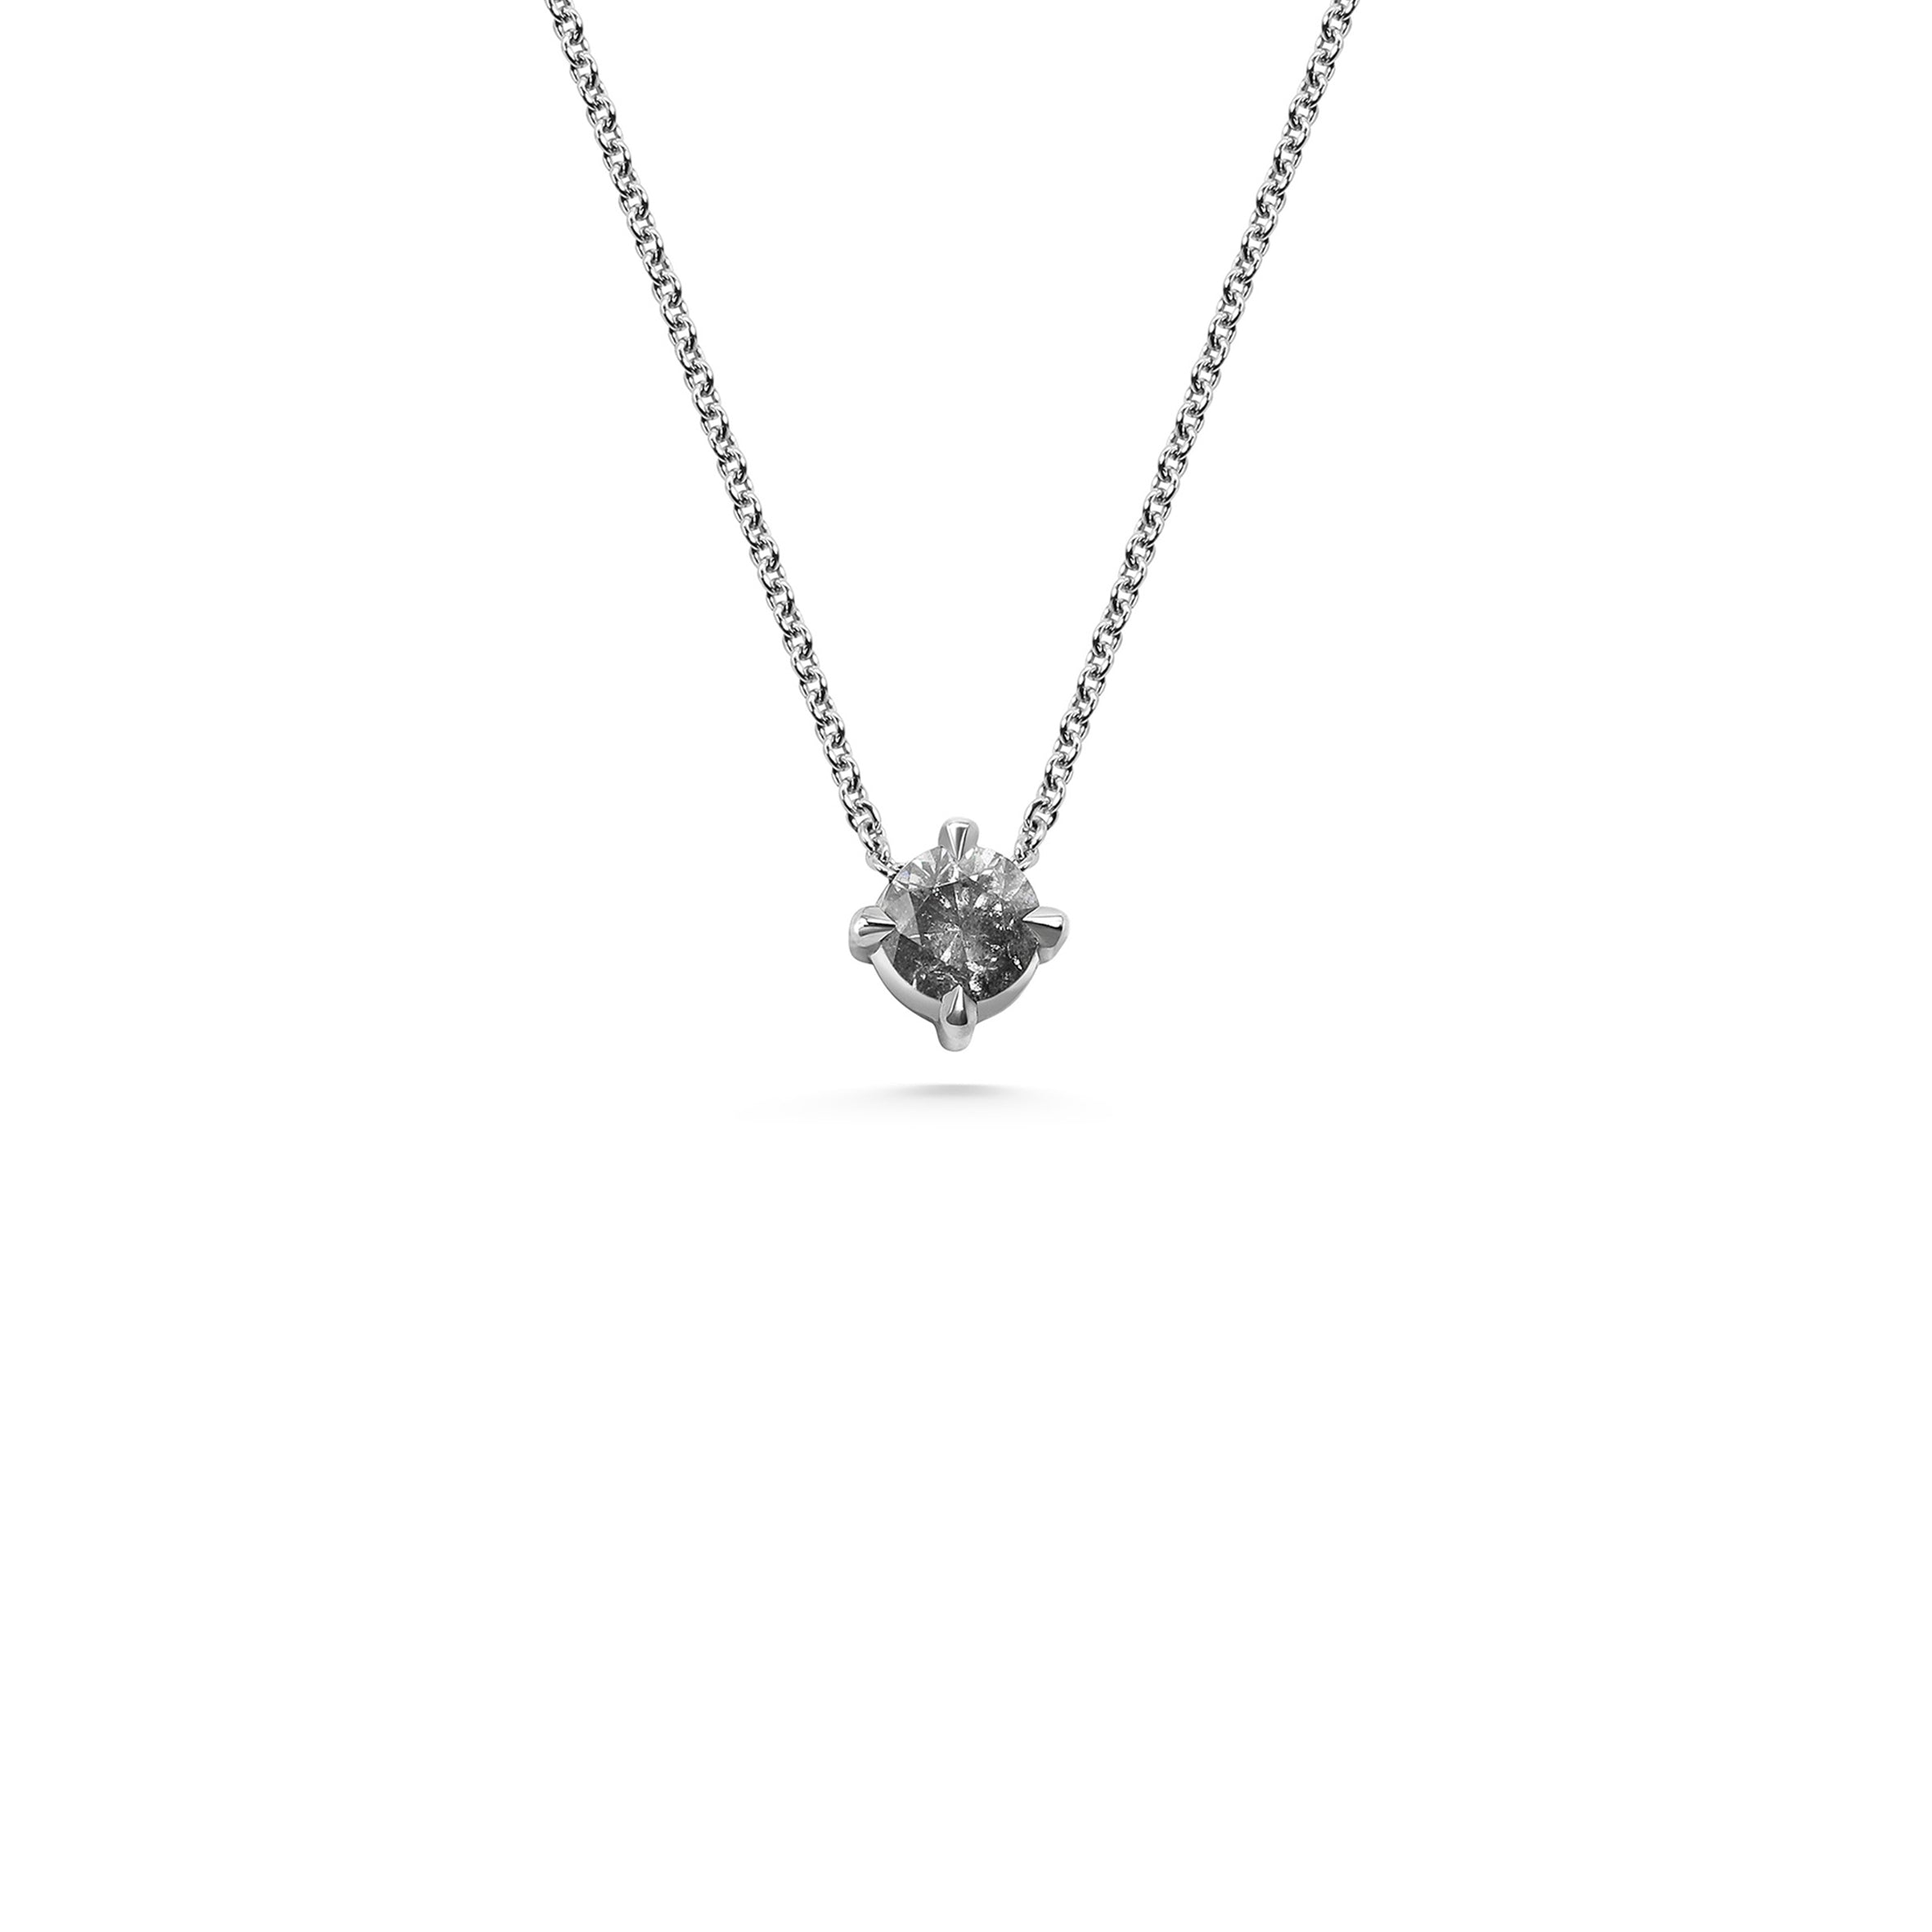 The 4mm Grey Diamond Slider Necklace by East London jeweller Rachel Boston | Discover our collections of unique and timeless engagement rings, wedding rings, and modern fine jewellery.